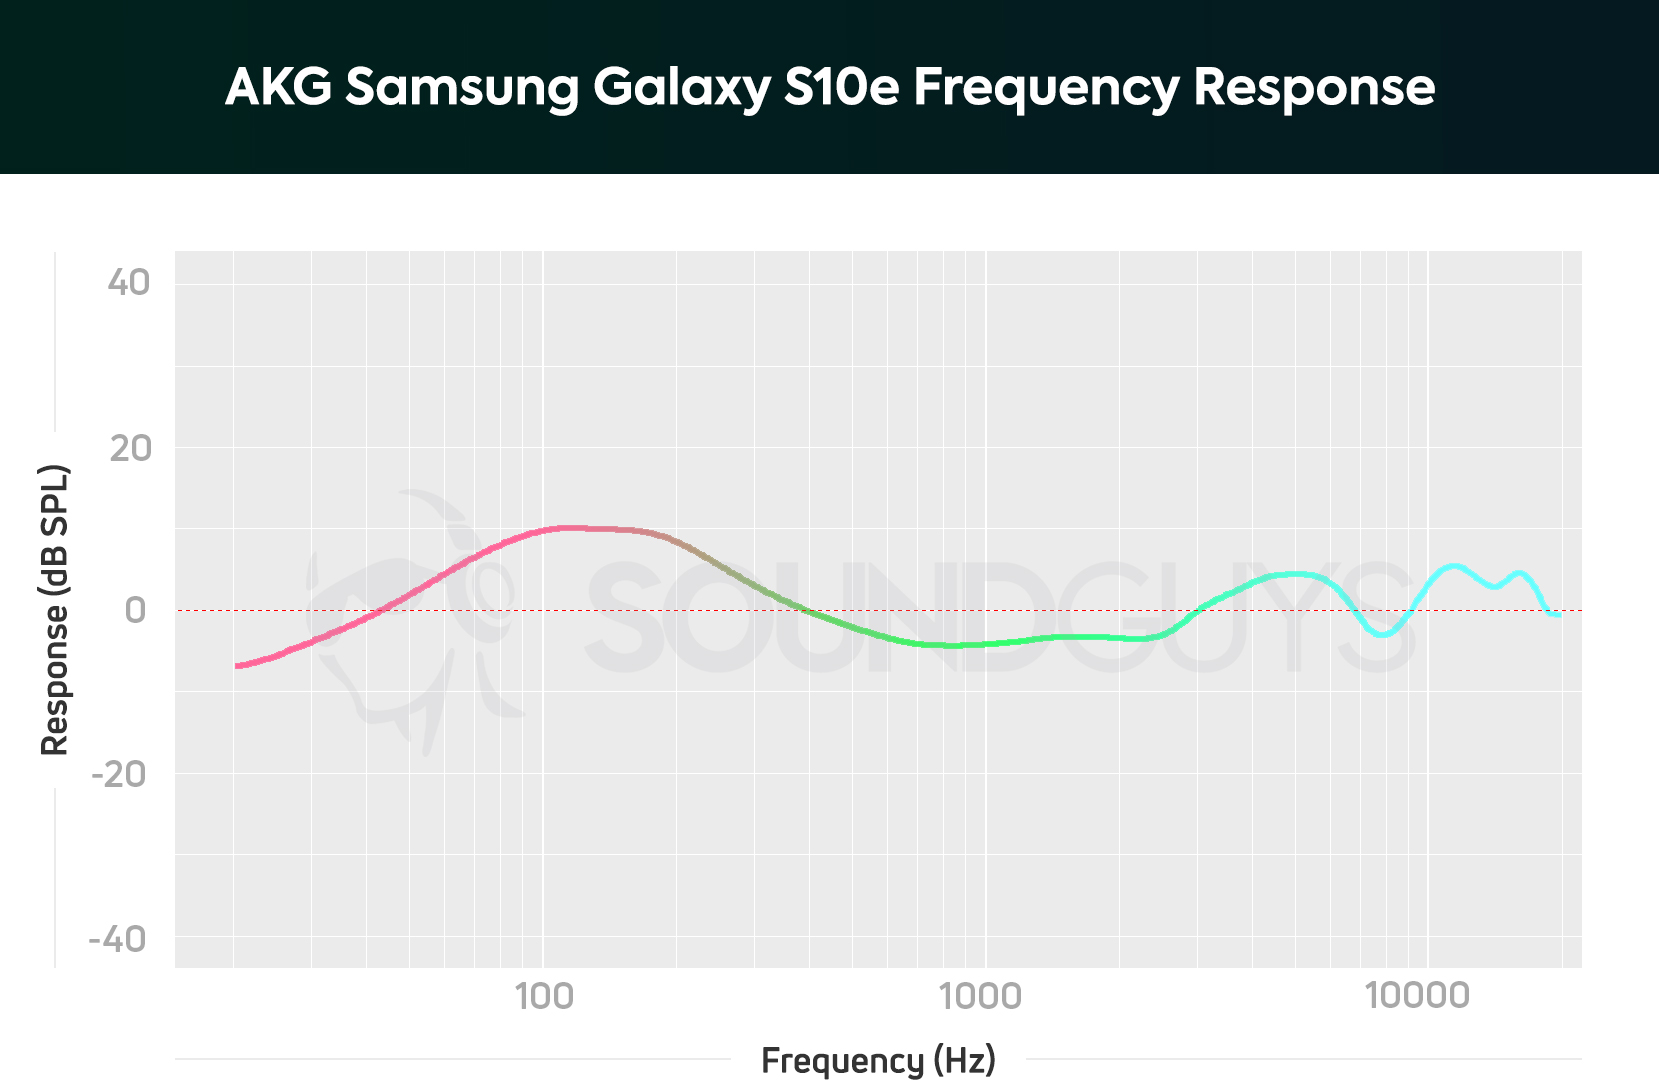 AKG Samsung Galaxy S10e earbuds frequency response chart.